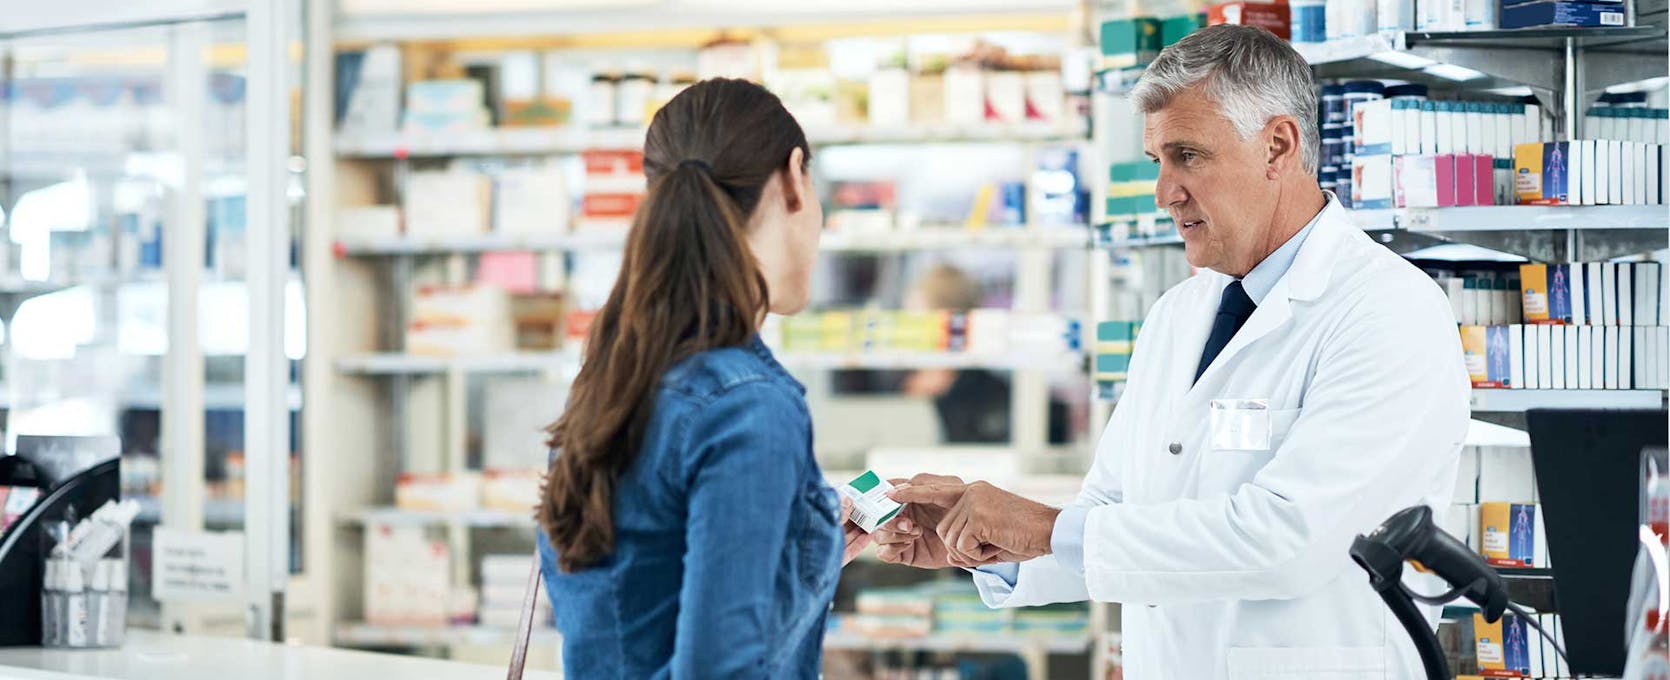 Pharmacist speaking with a customer at a pharmacy